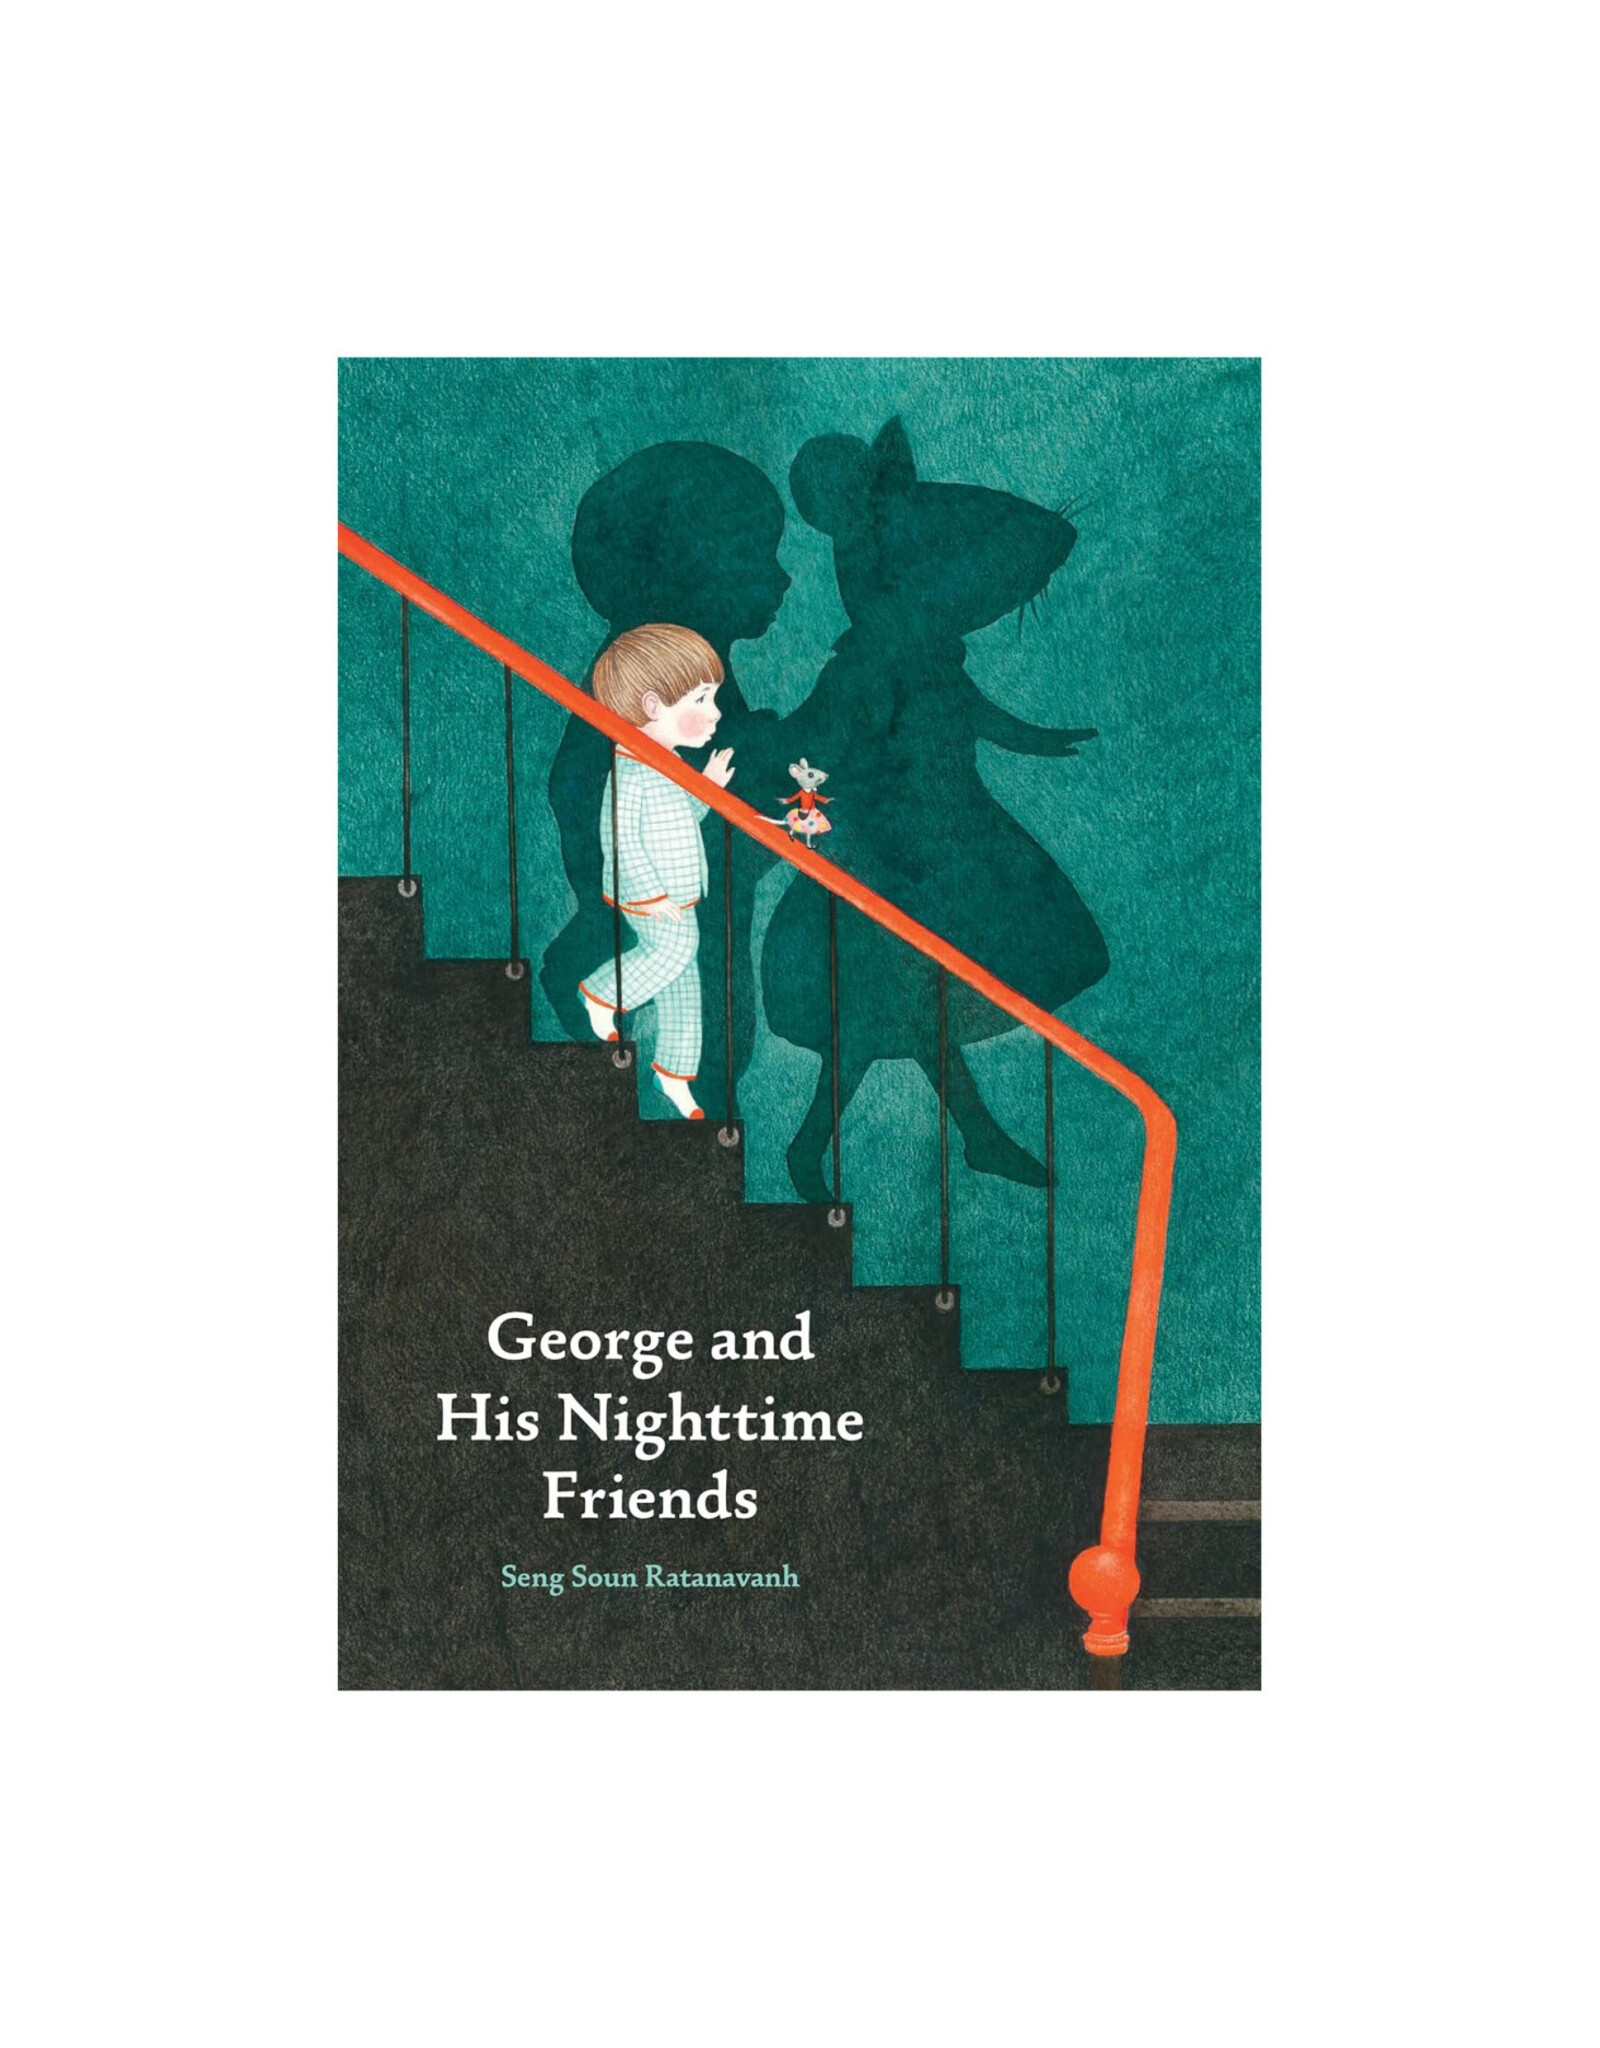 George and His Nighttime Friends